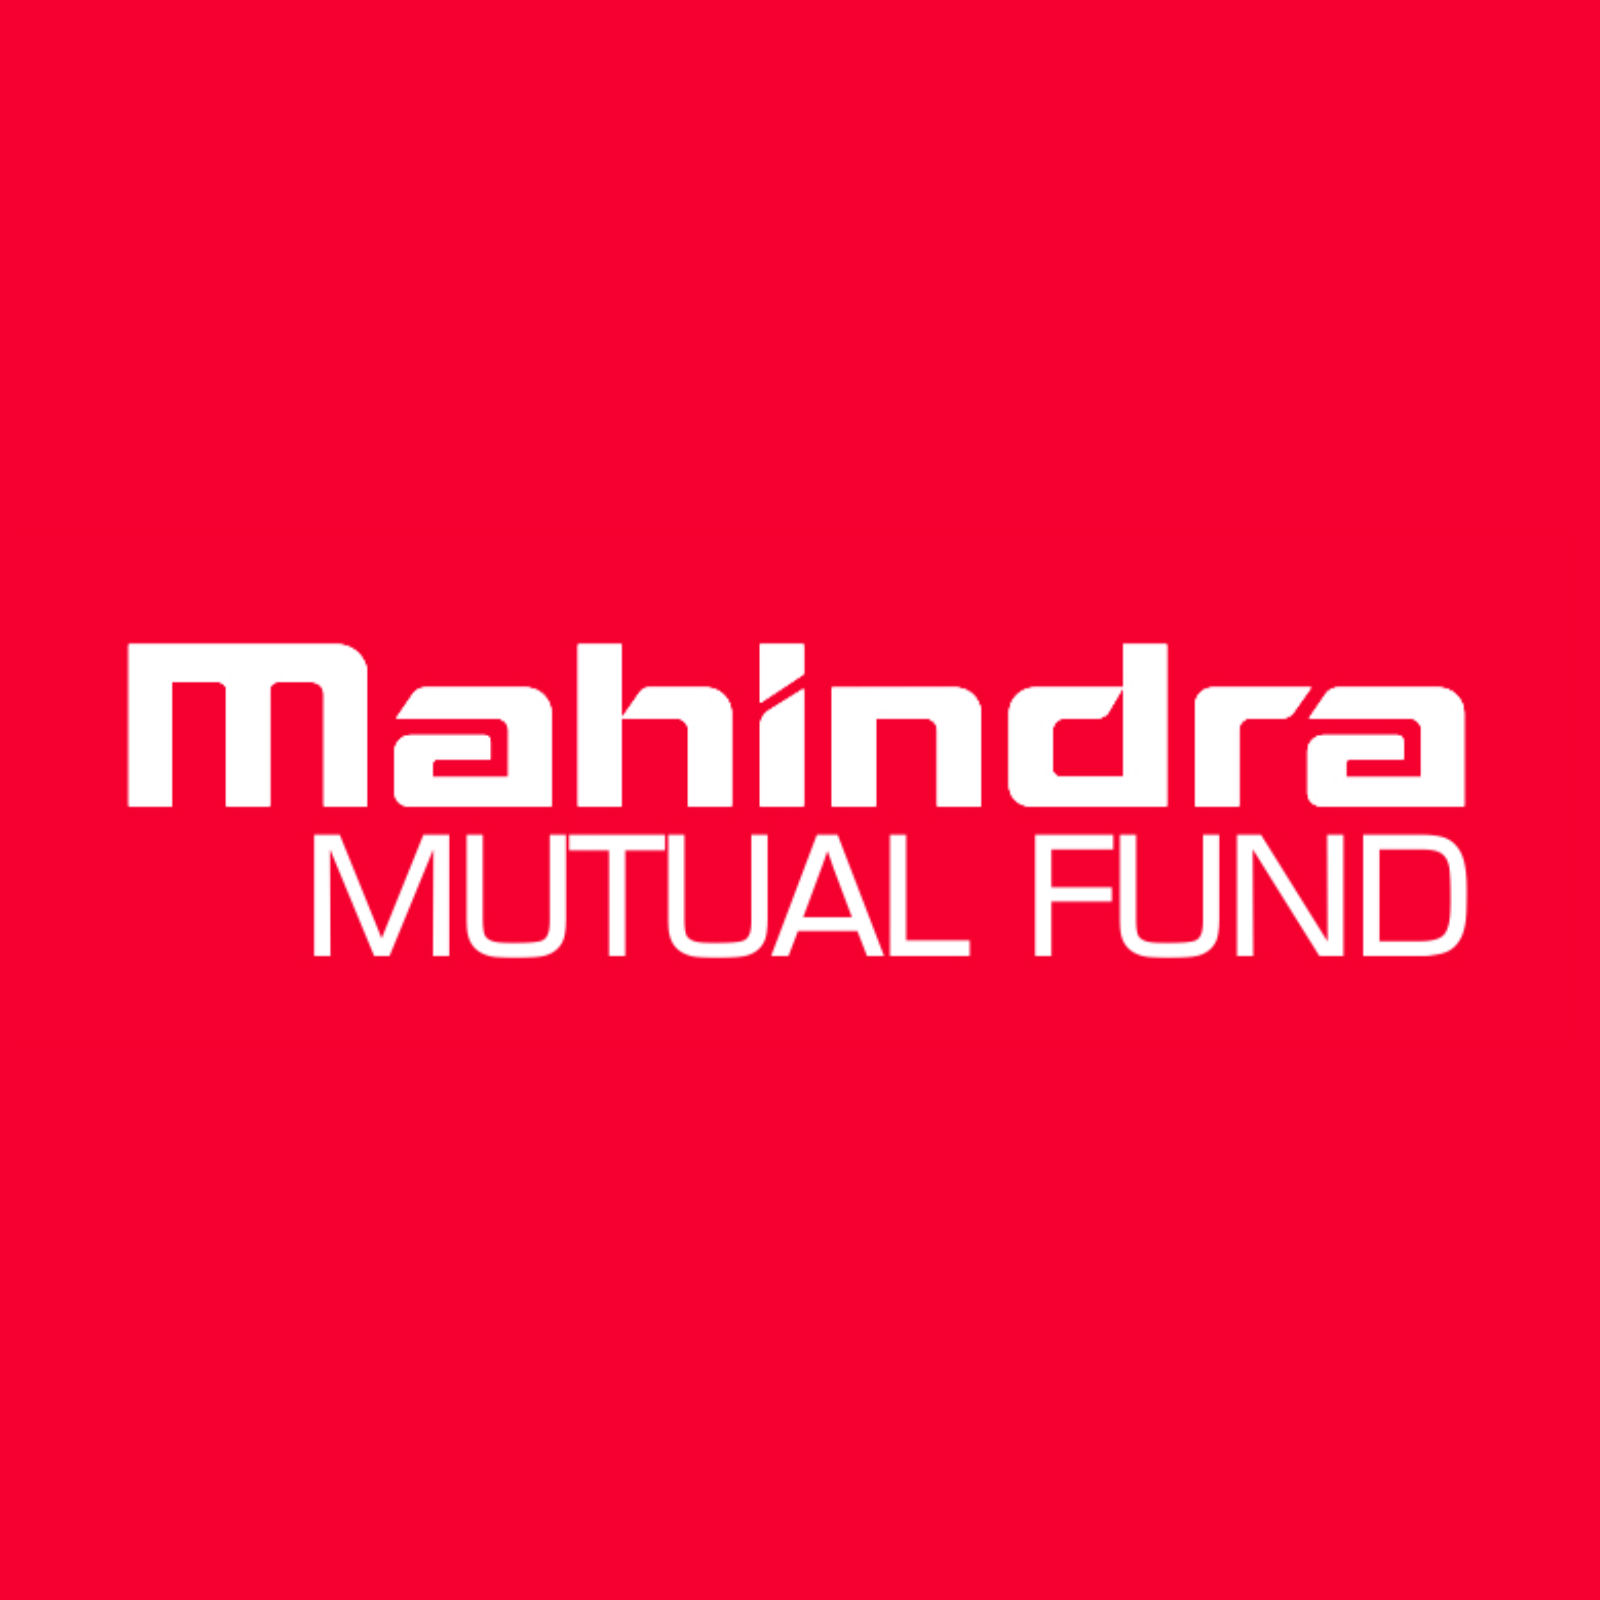 MAHINDRA ASSET MANAGEMENT COMPANY PRIVATE LIMITED